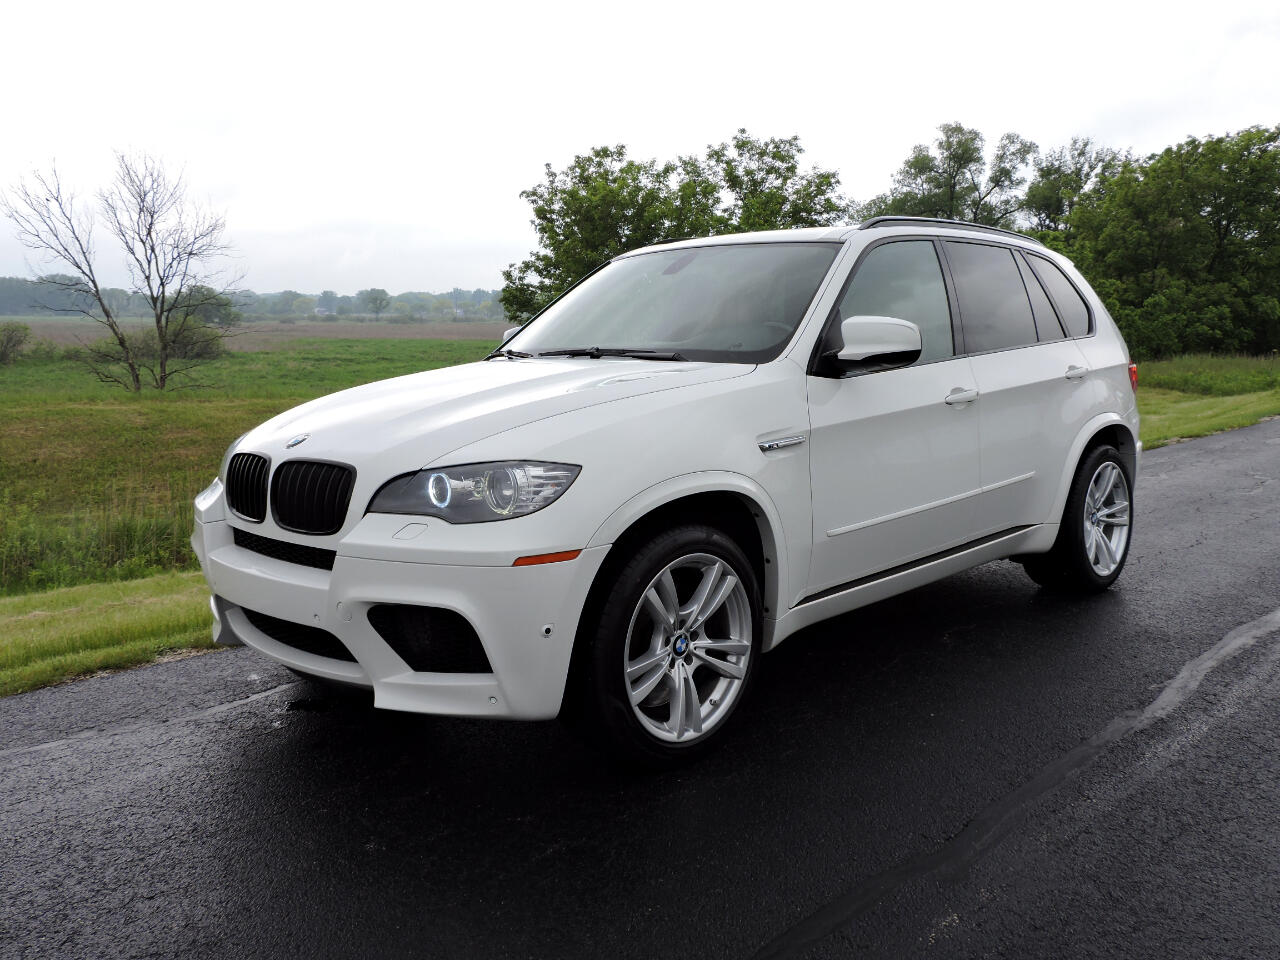 Used 2012 BMW X5 M AWD 4dr for Sale in Hartford WI 53027 M&J Auto